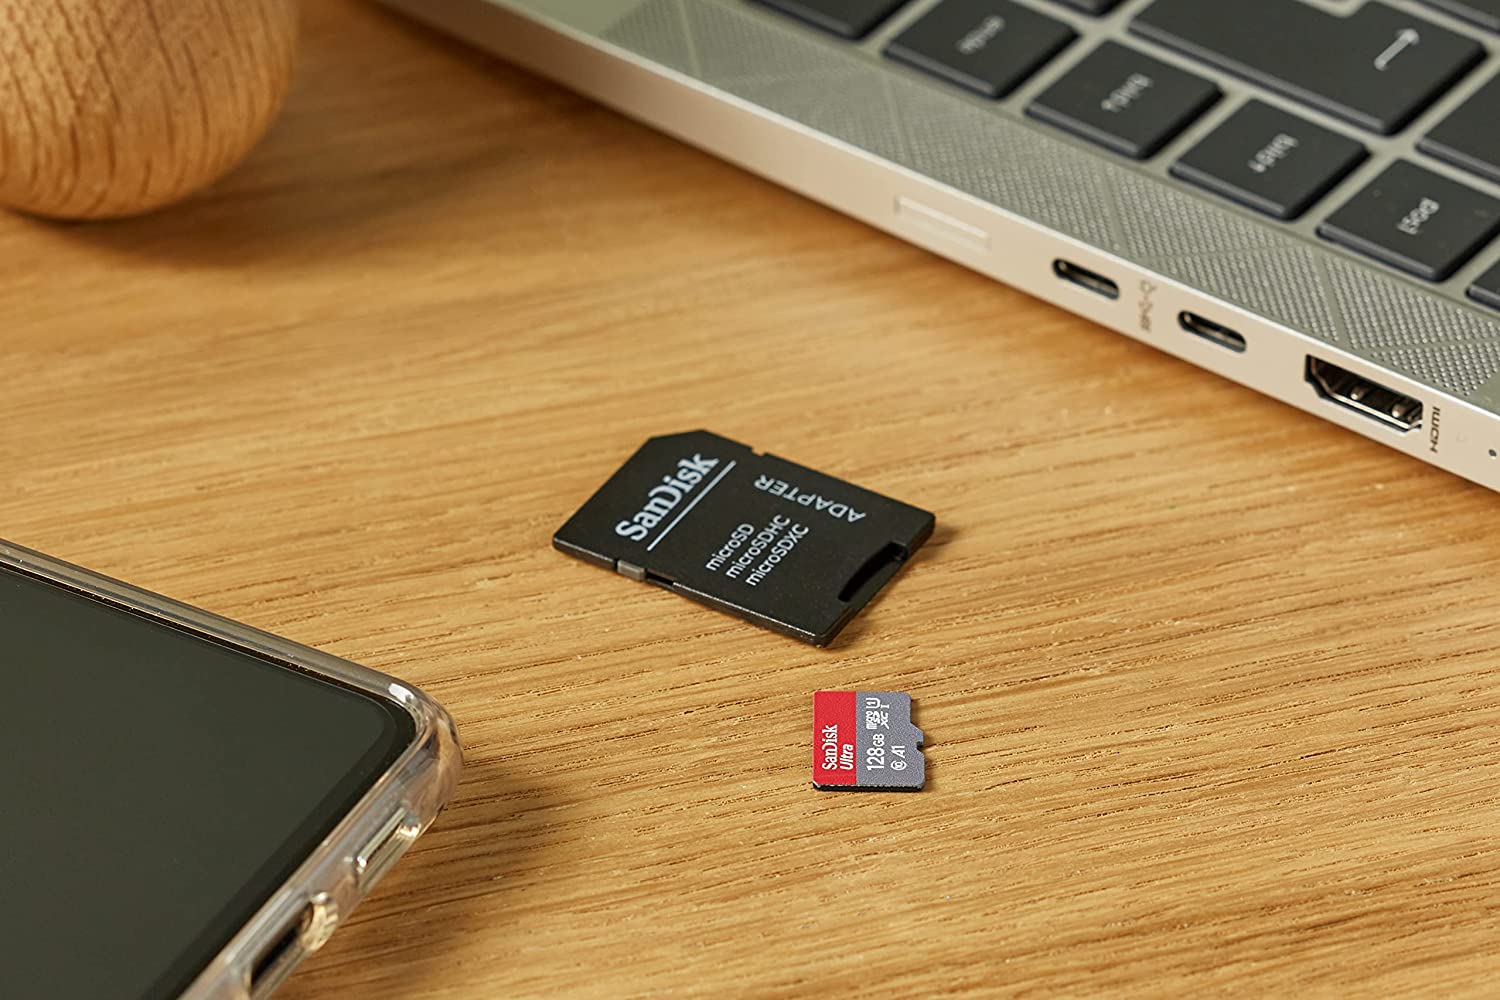 SanDisk's 1TB SD card has more storage than your laptop - The Verge